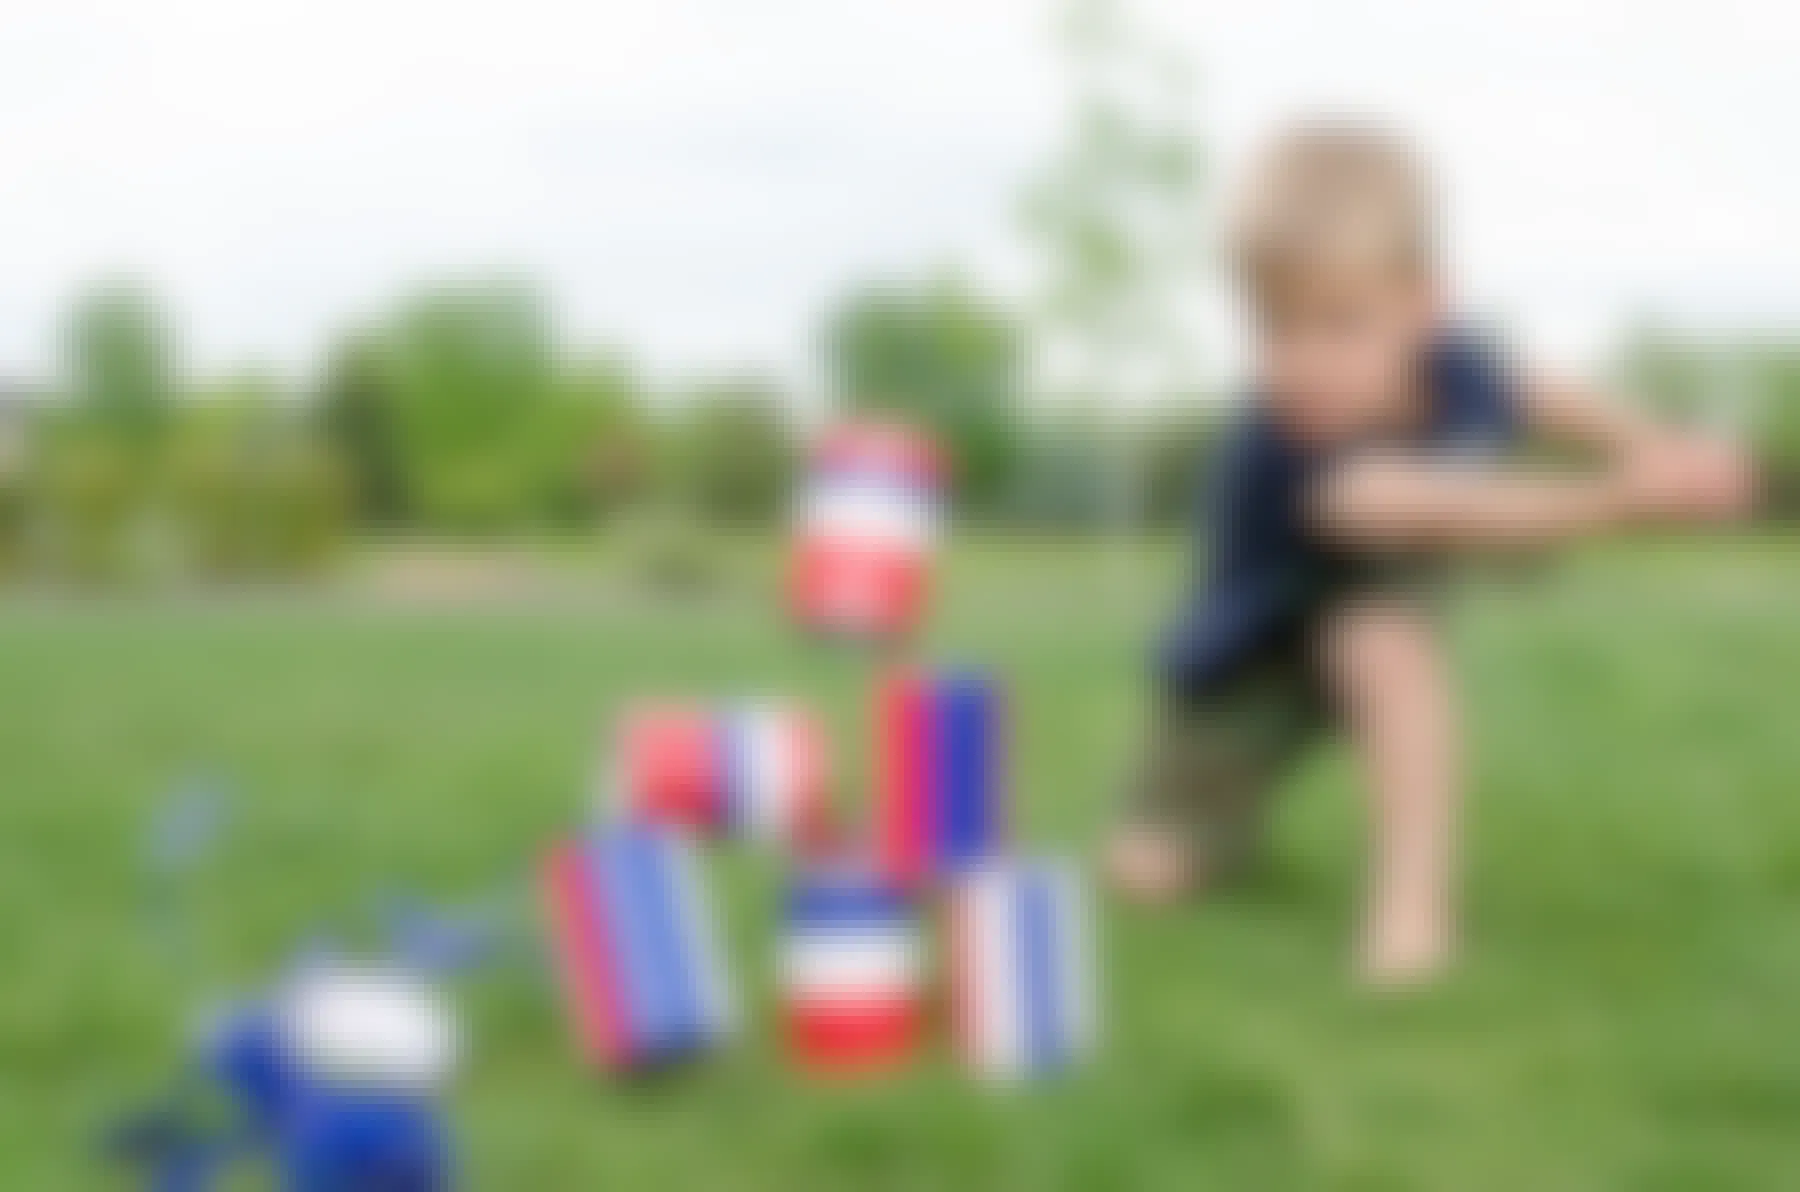 A child throwing a beanbag made of a sock filled with rice at a stack of red, white, and blue striped cans and knocking them down in the backyard.